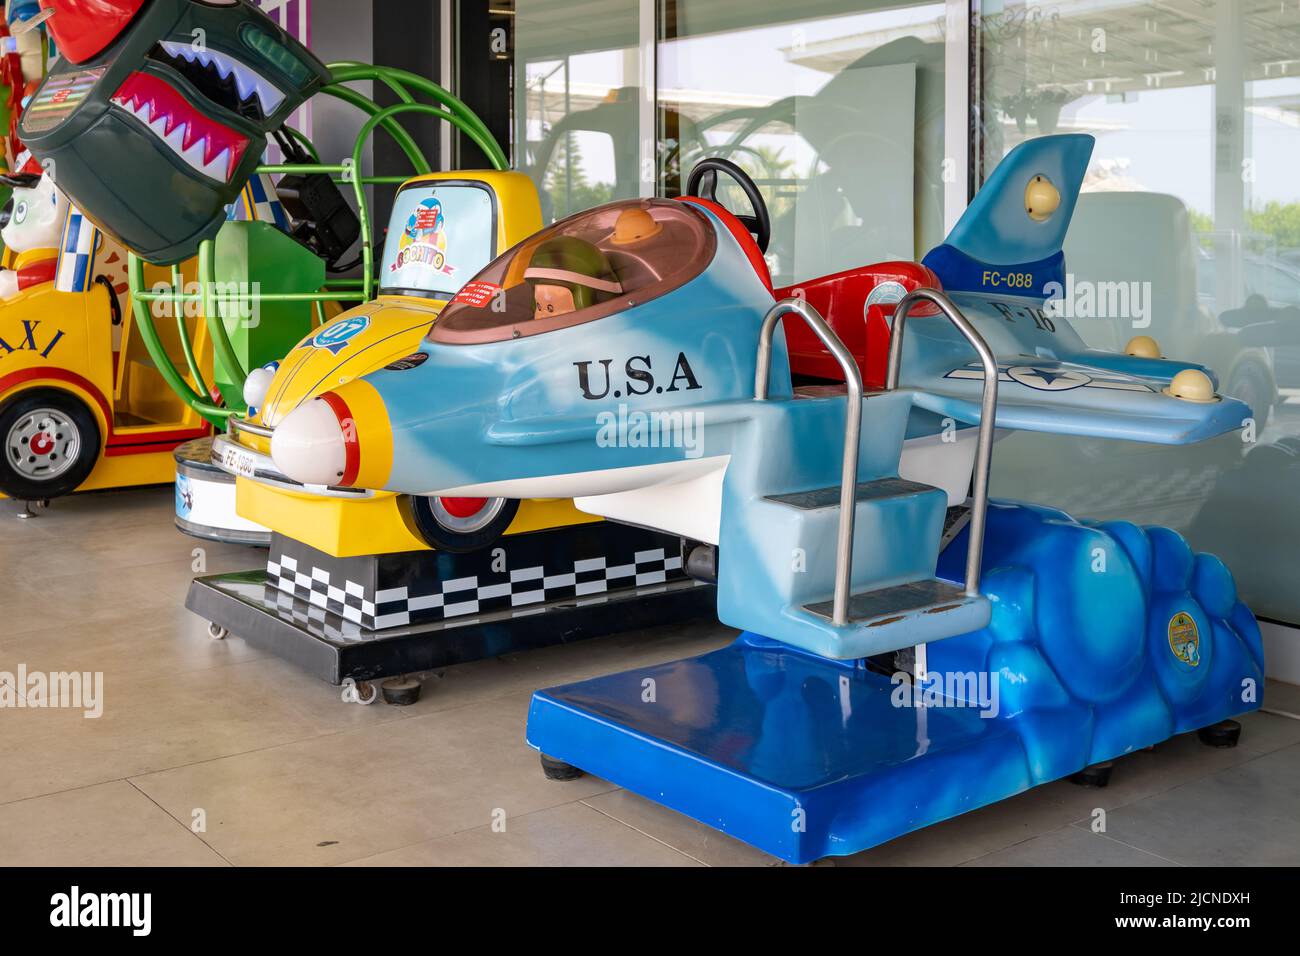 Colorful kiddie rides in front of a local store. Cyprus. Stock Photo